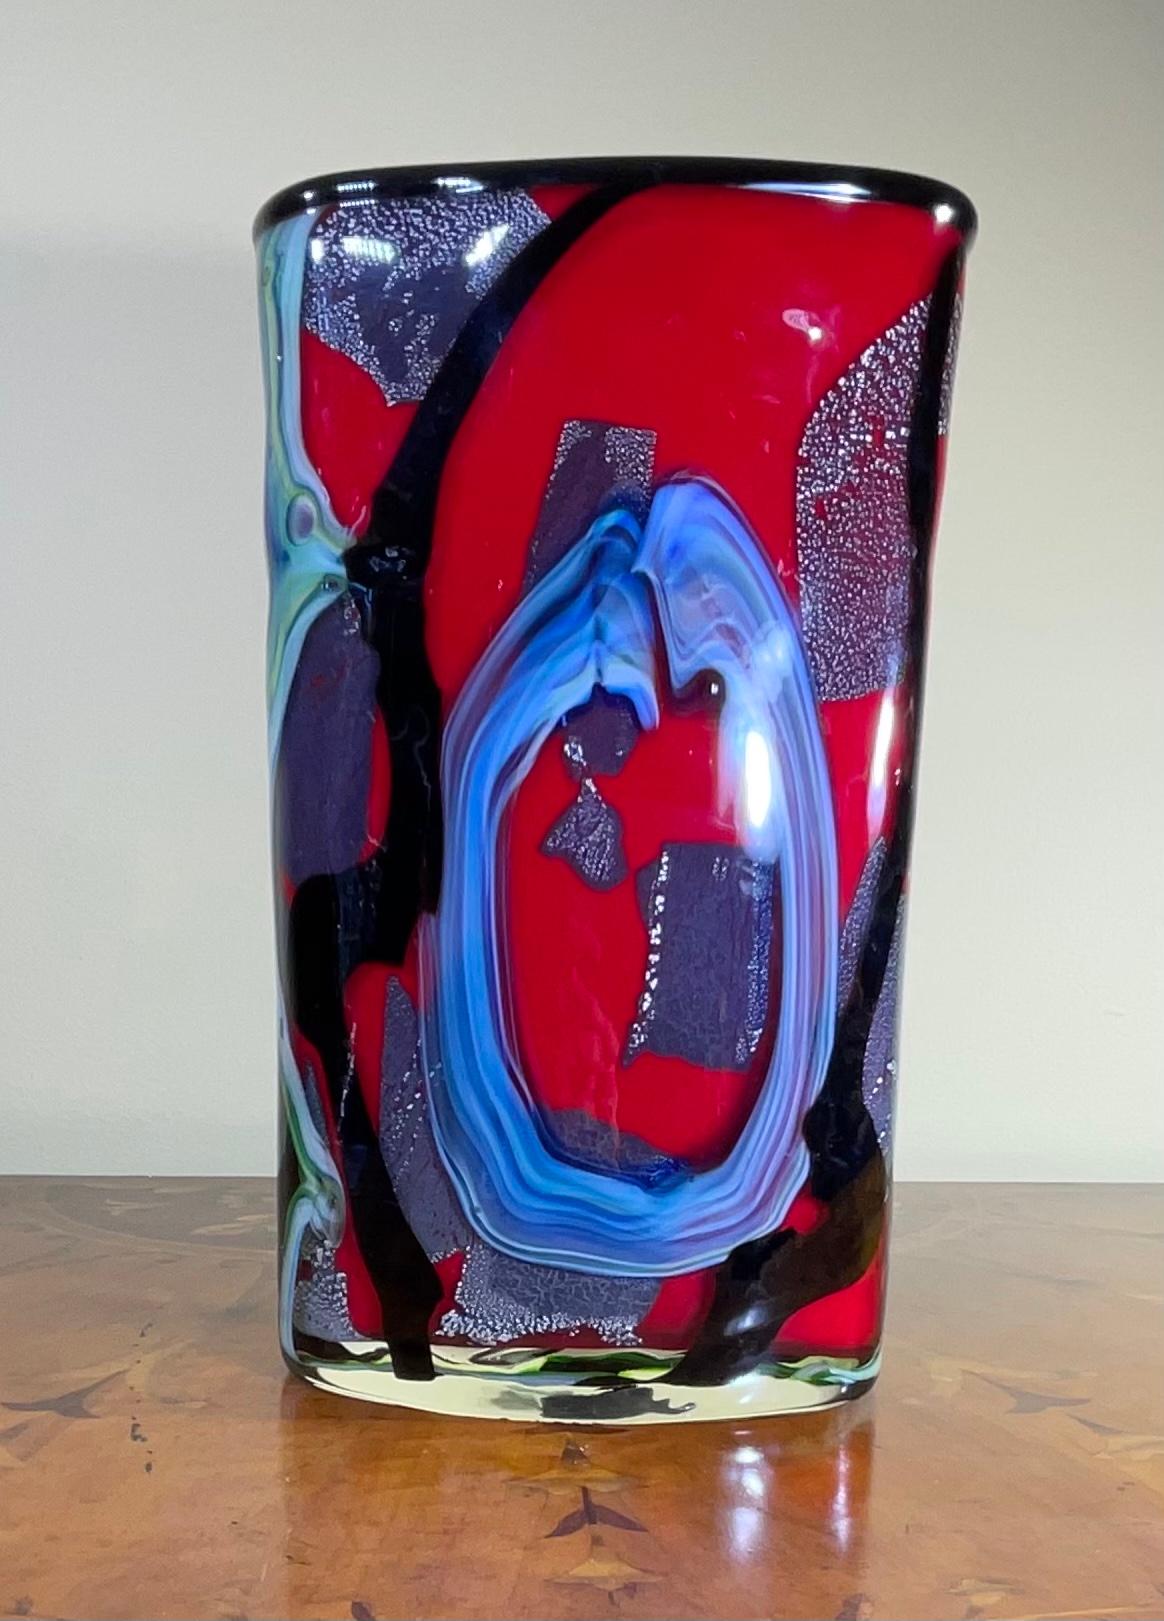 Elegant vase hand blown Studio Murano glass, to characterize the uniqueness of the vibrant colors of garish-blue, red and green embellished with the use of silver dust, which creates a suggestive texture of shapes and colors, all in abstract